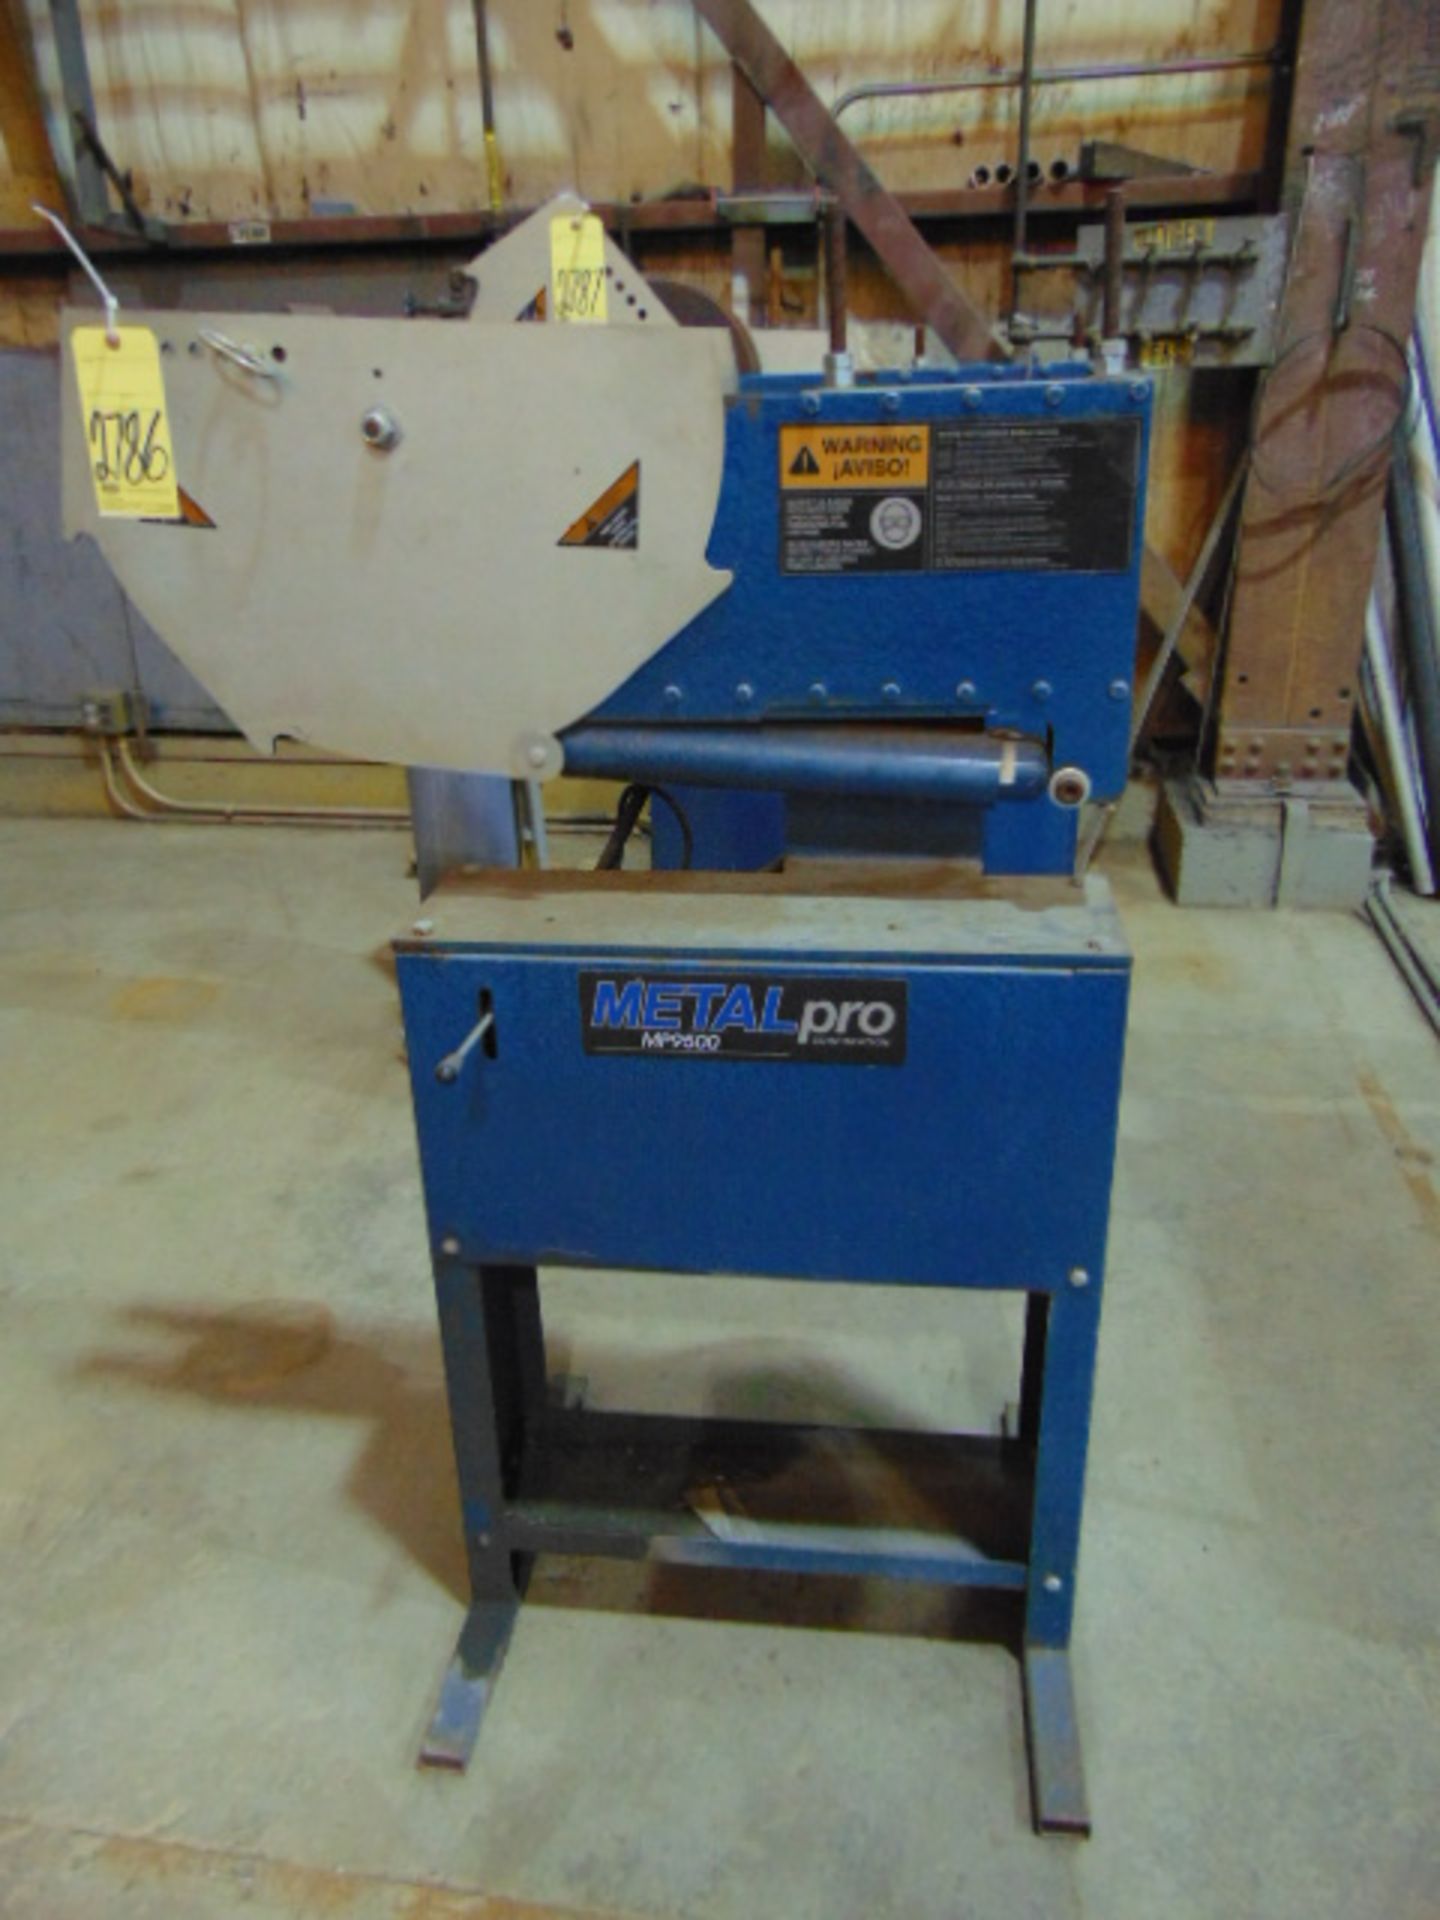 HYDRAULIC TUBE BENDER, METAL PRO MDL. MP9500, self-contained hyd. units, fabricated stand